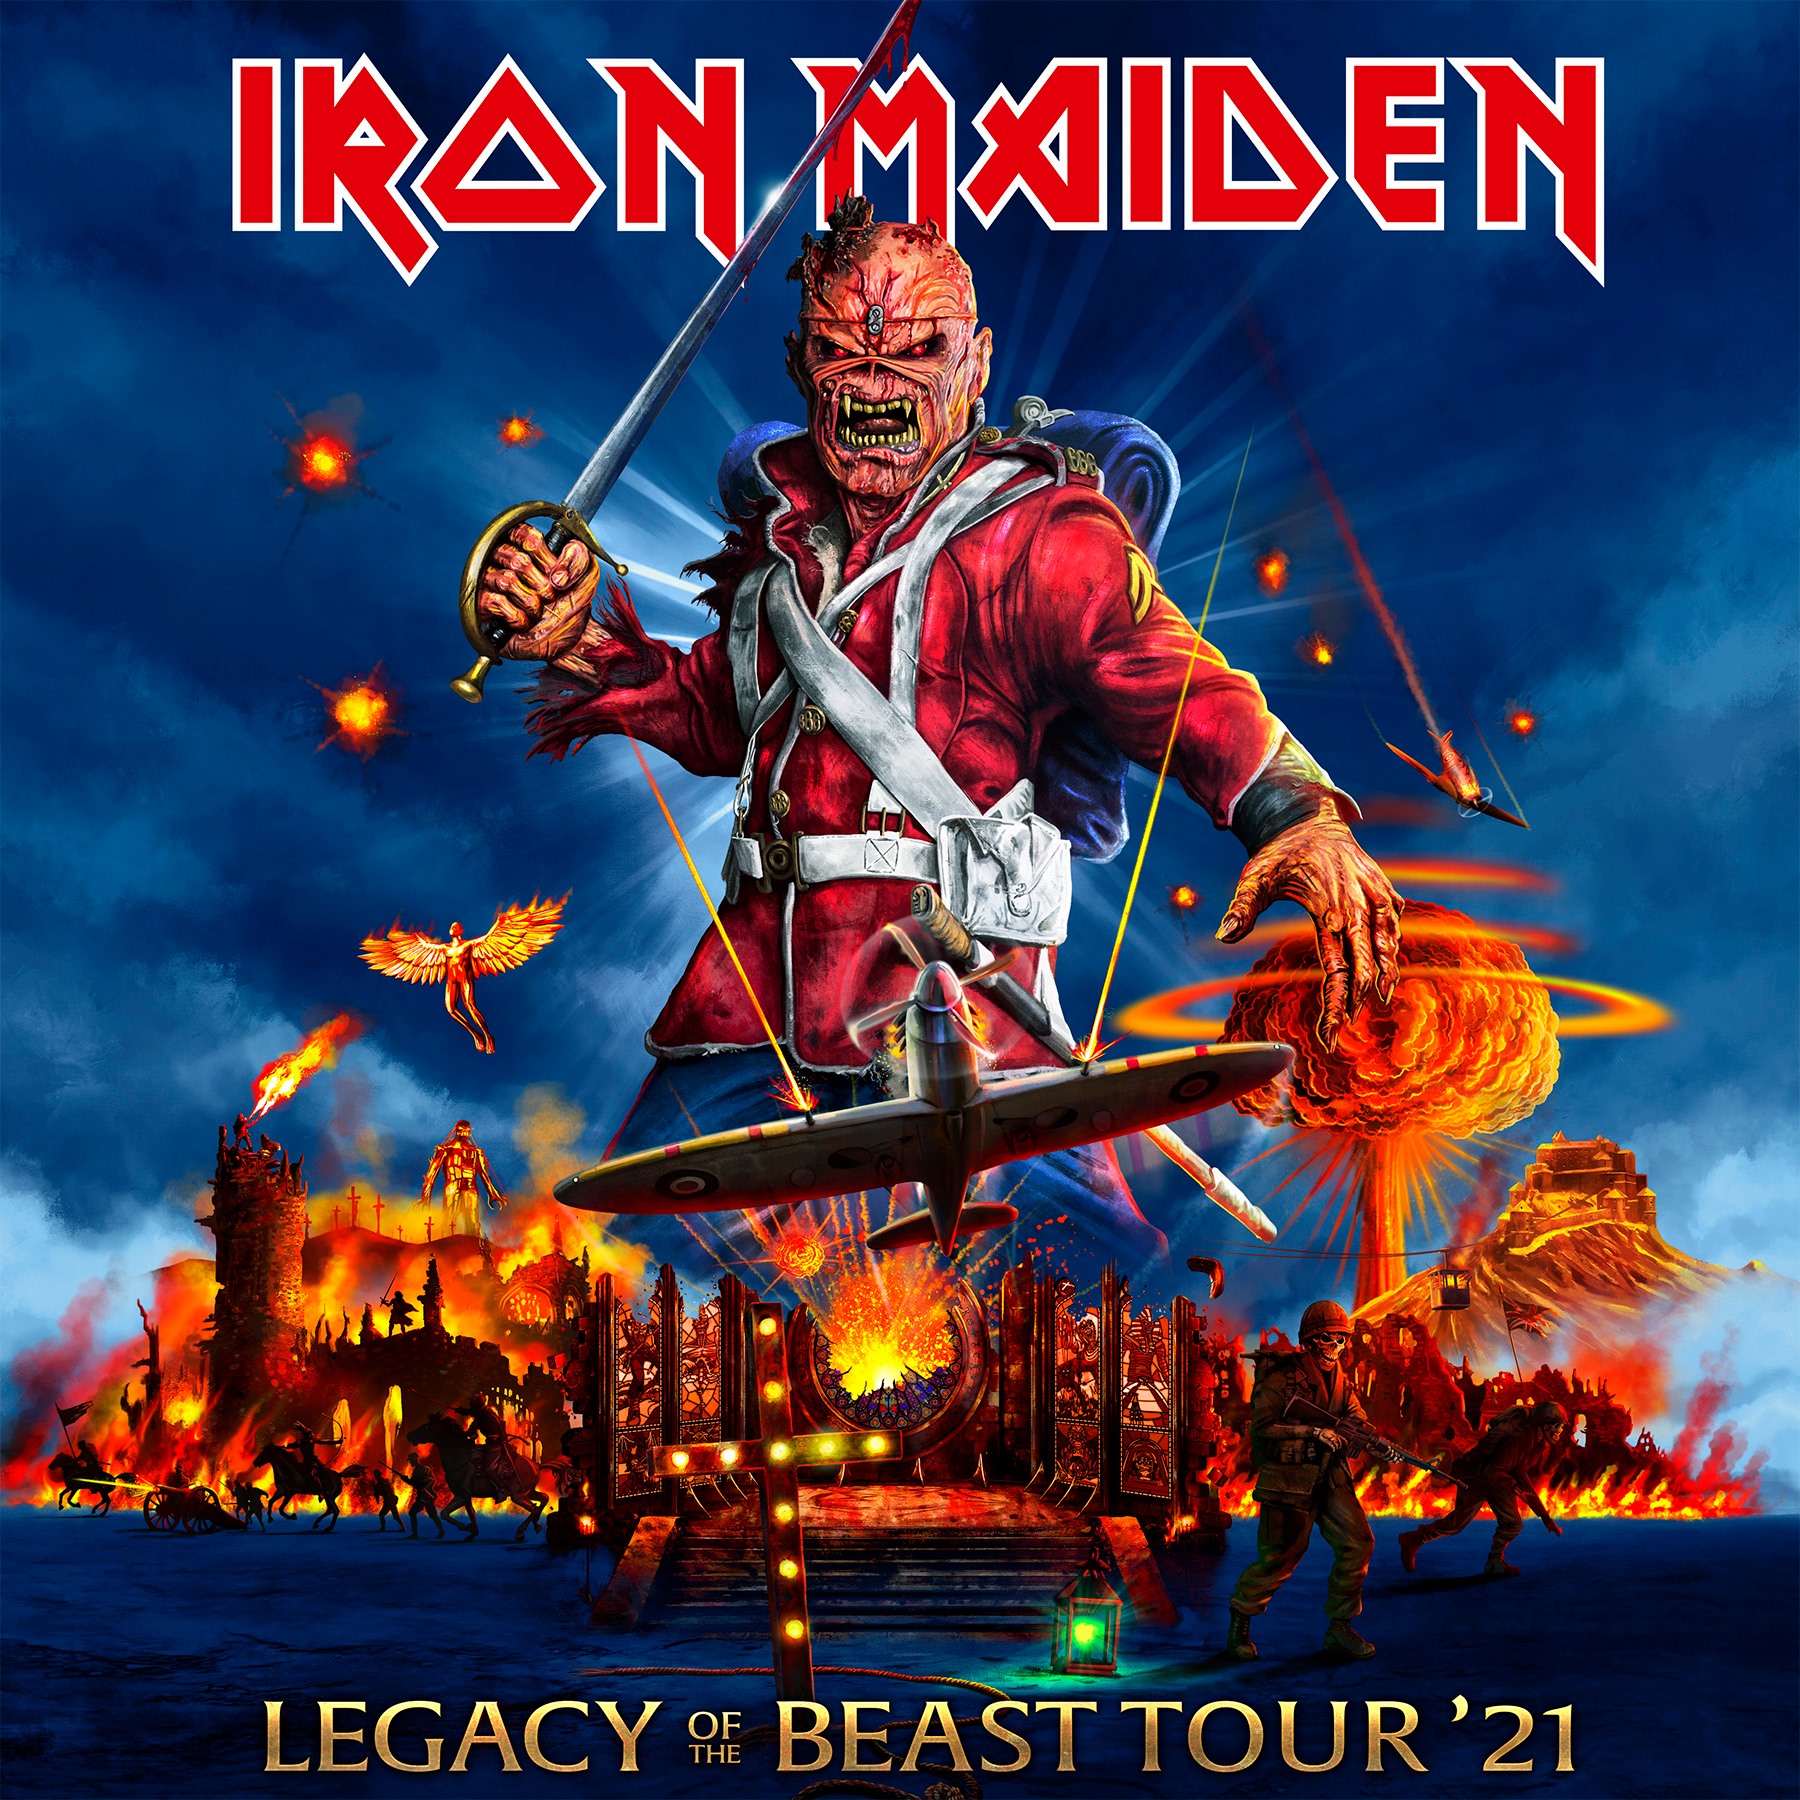 who is on tour with iron maiden